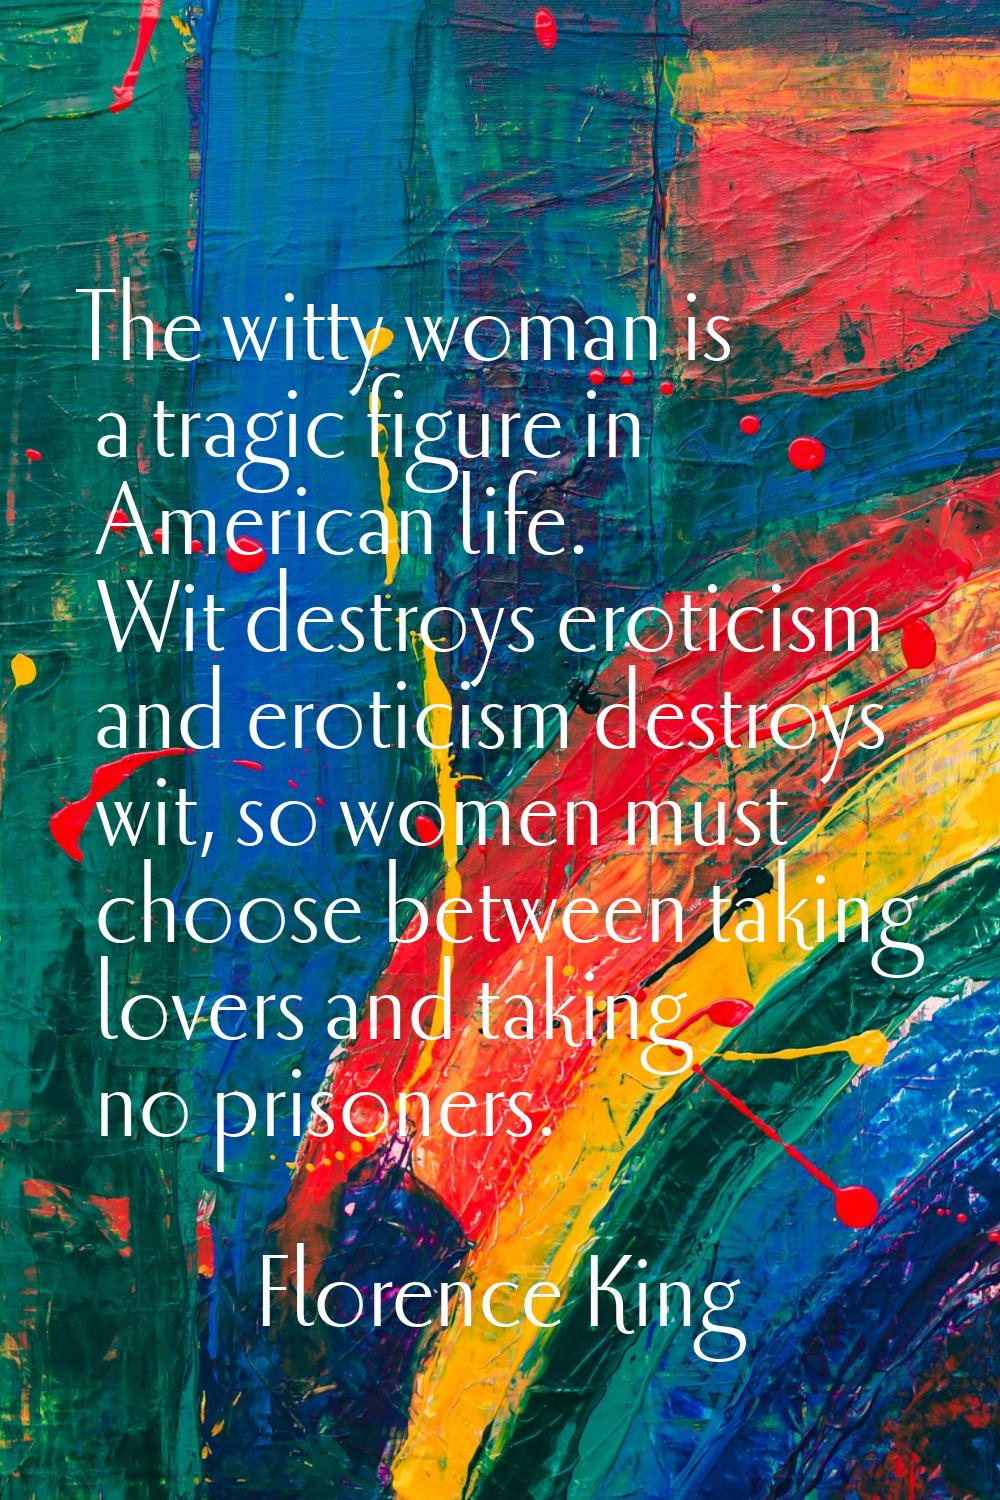 The witty woman is a tragic figure in American life. Wit destroys eroticism and eroticism destroys 